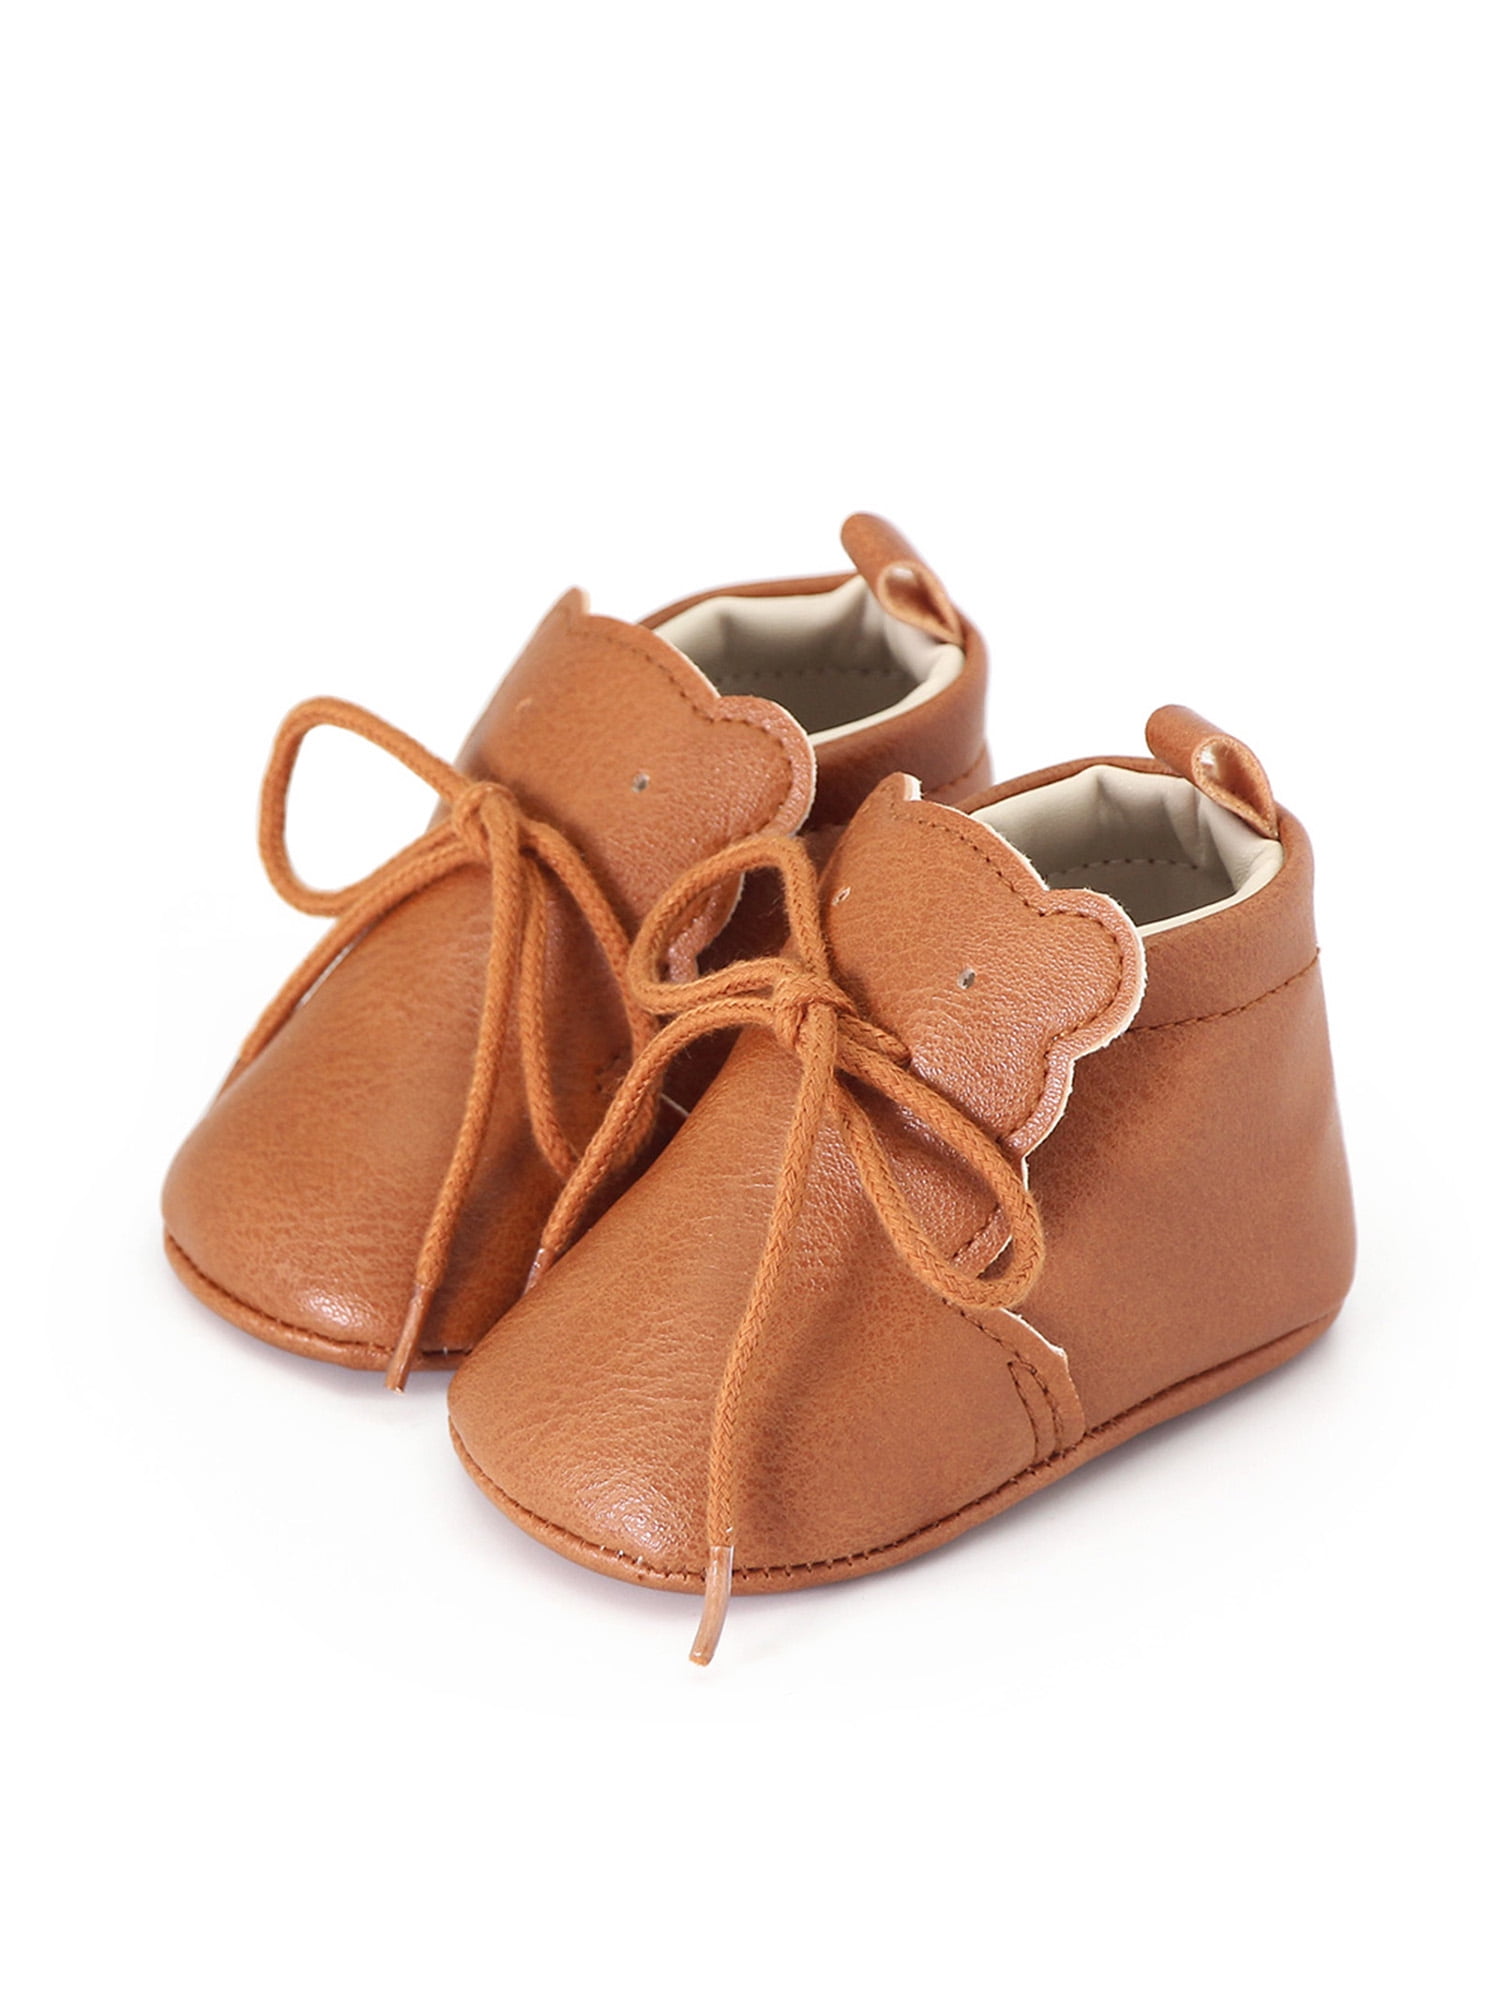 Two Tone Brown Little Blue Lamb Girls Boys Toddler Childrens PU Suede Leather Boots